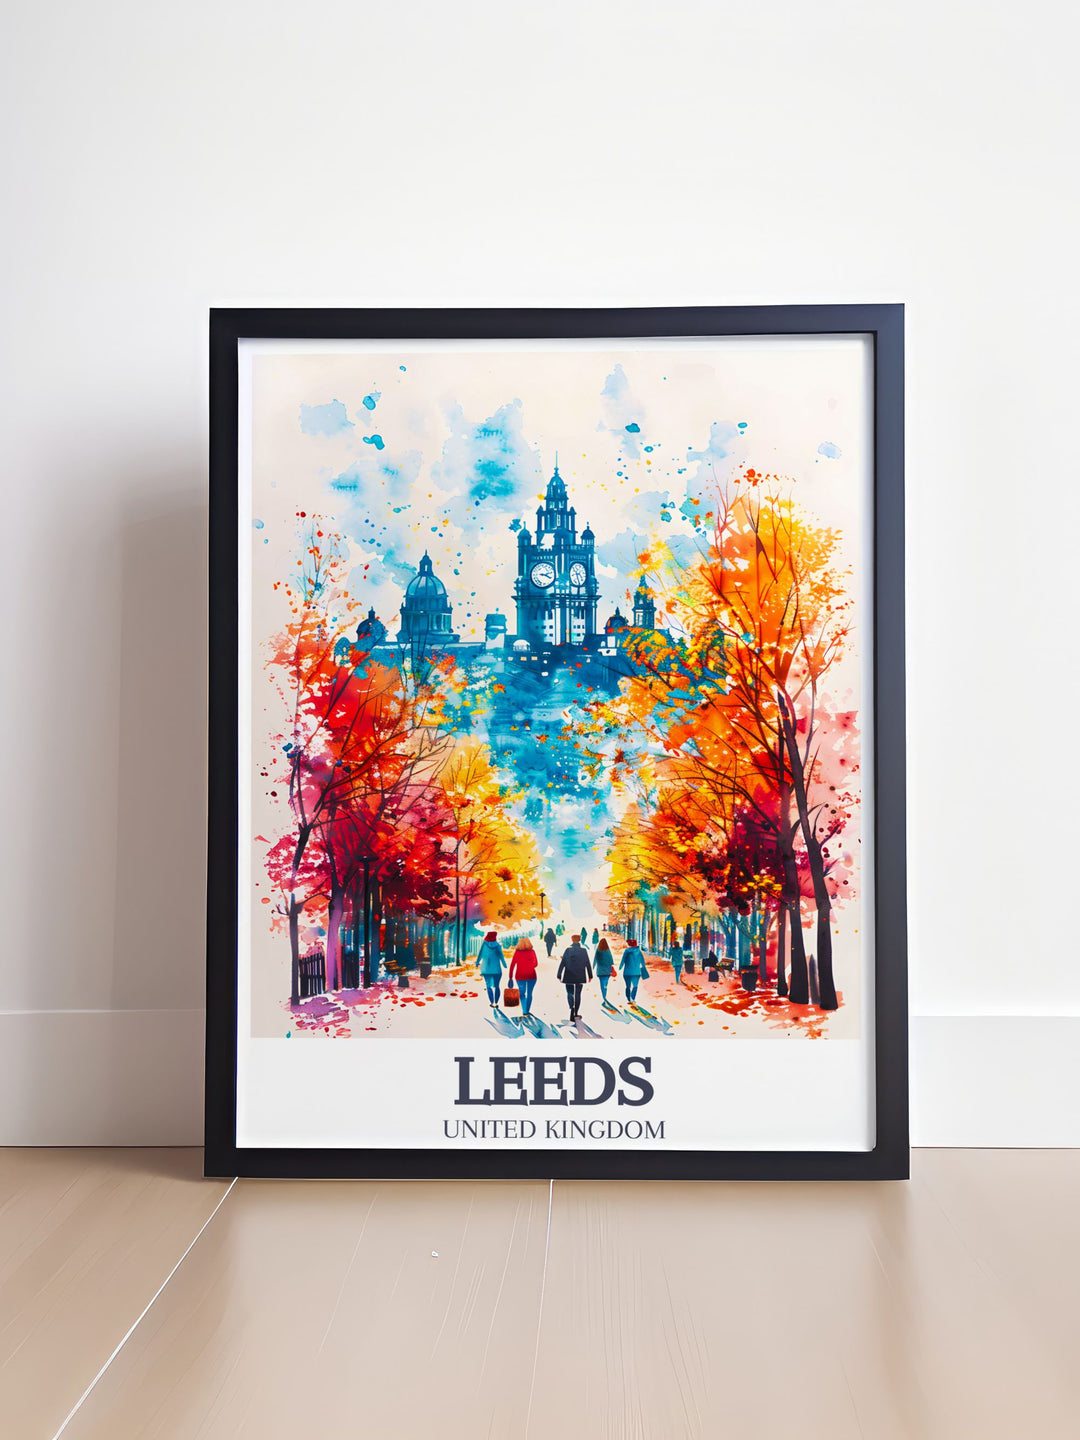 Elegant Leeds townhall and Leeds townhall clock poster ideal for adding sophistication to your home decor. This England print captures the essence of Leeds architectural heritage and makes a thoughtful gift for loved ones.